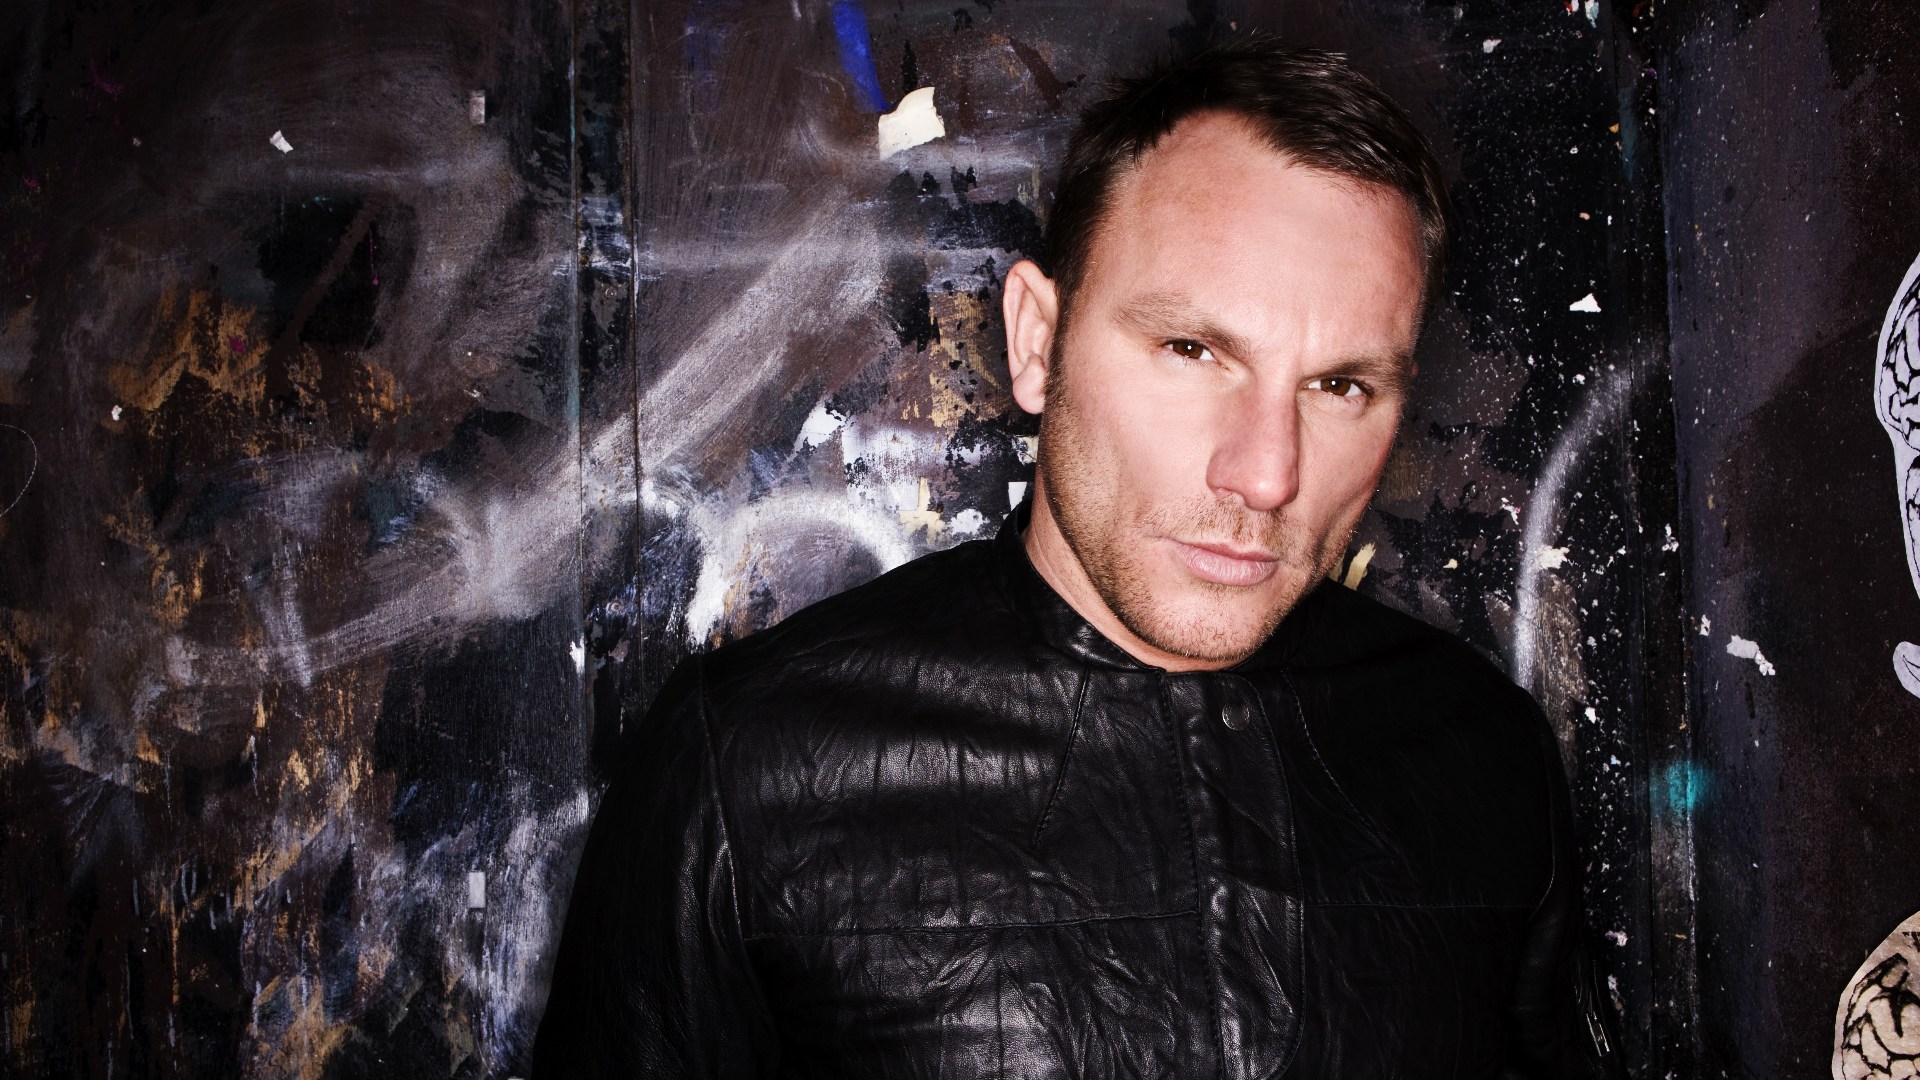 Presented by Mark Knight: 60 minutes of outstanding house music with Mark Knight, keeping you up to date with what's hot in the clubs, plenty of world exclusives and of course all the latest Toolroom release info. It's BIG.